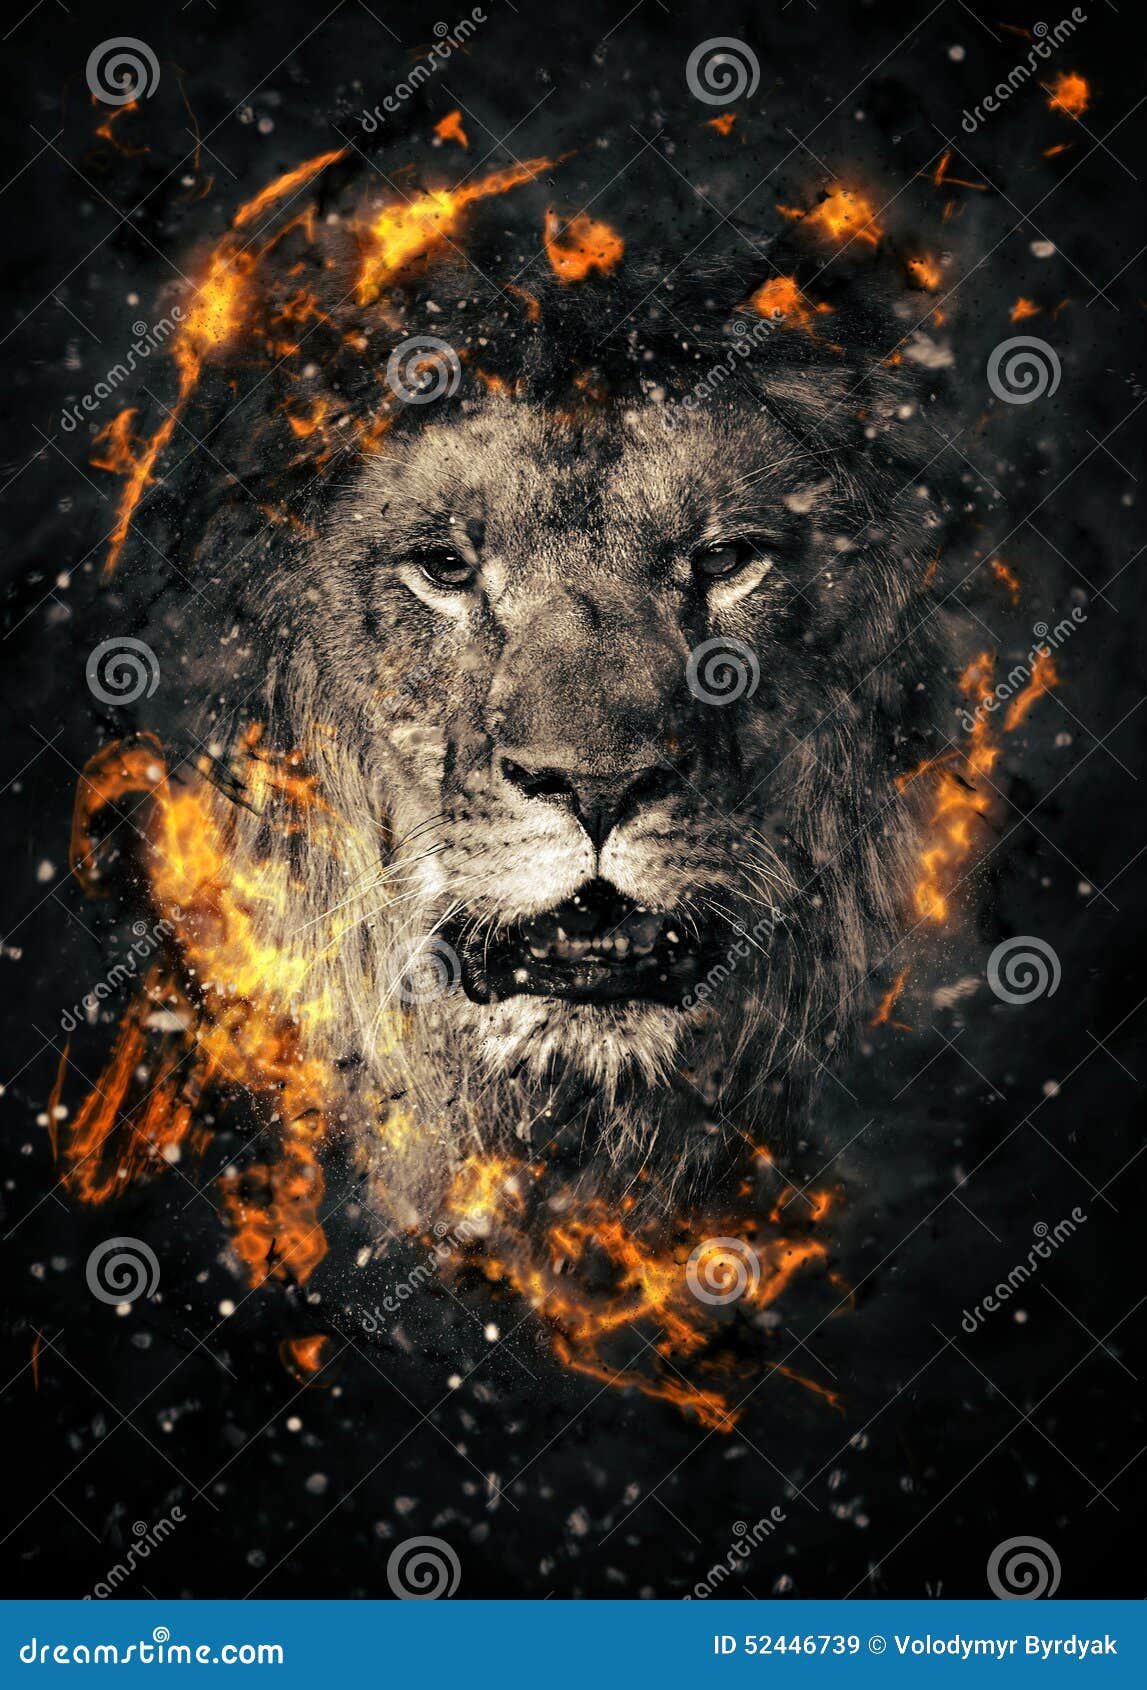 1500 Lion Fire Stock Photos Pictures  RoyaltyFree Images  iStock   Lion circus Sun Nature